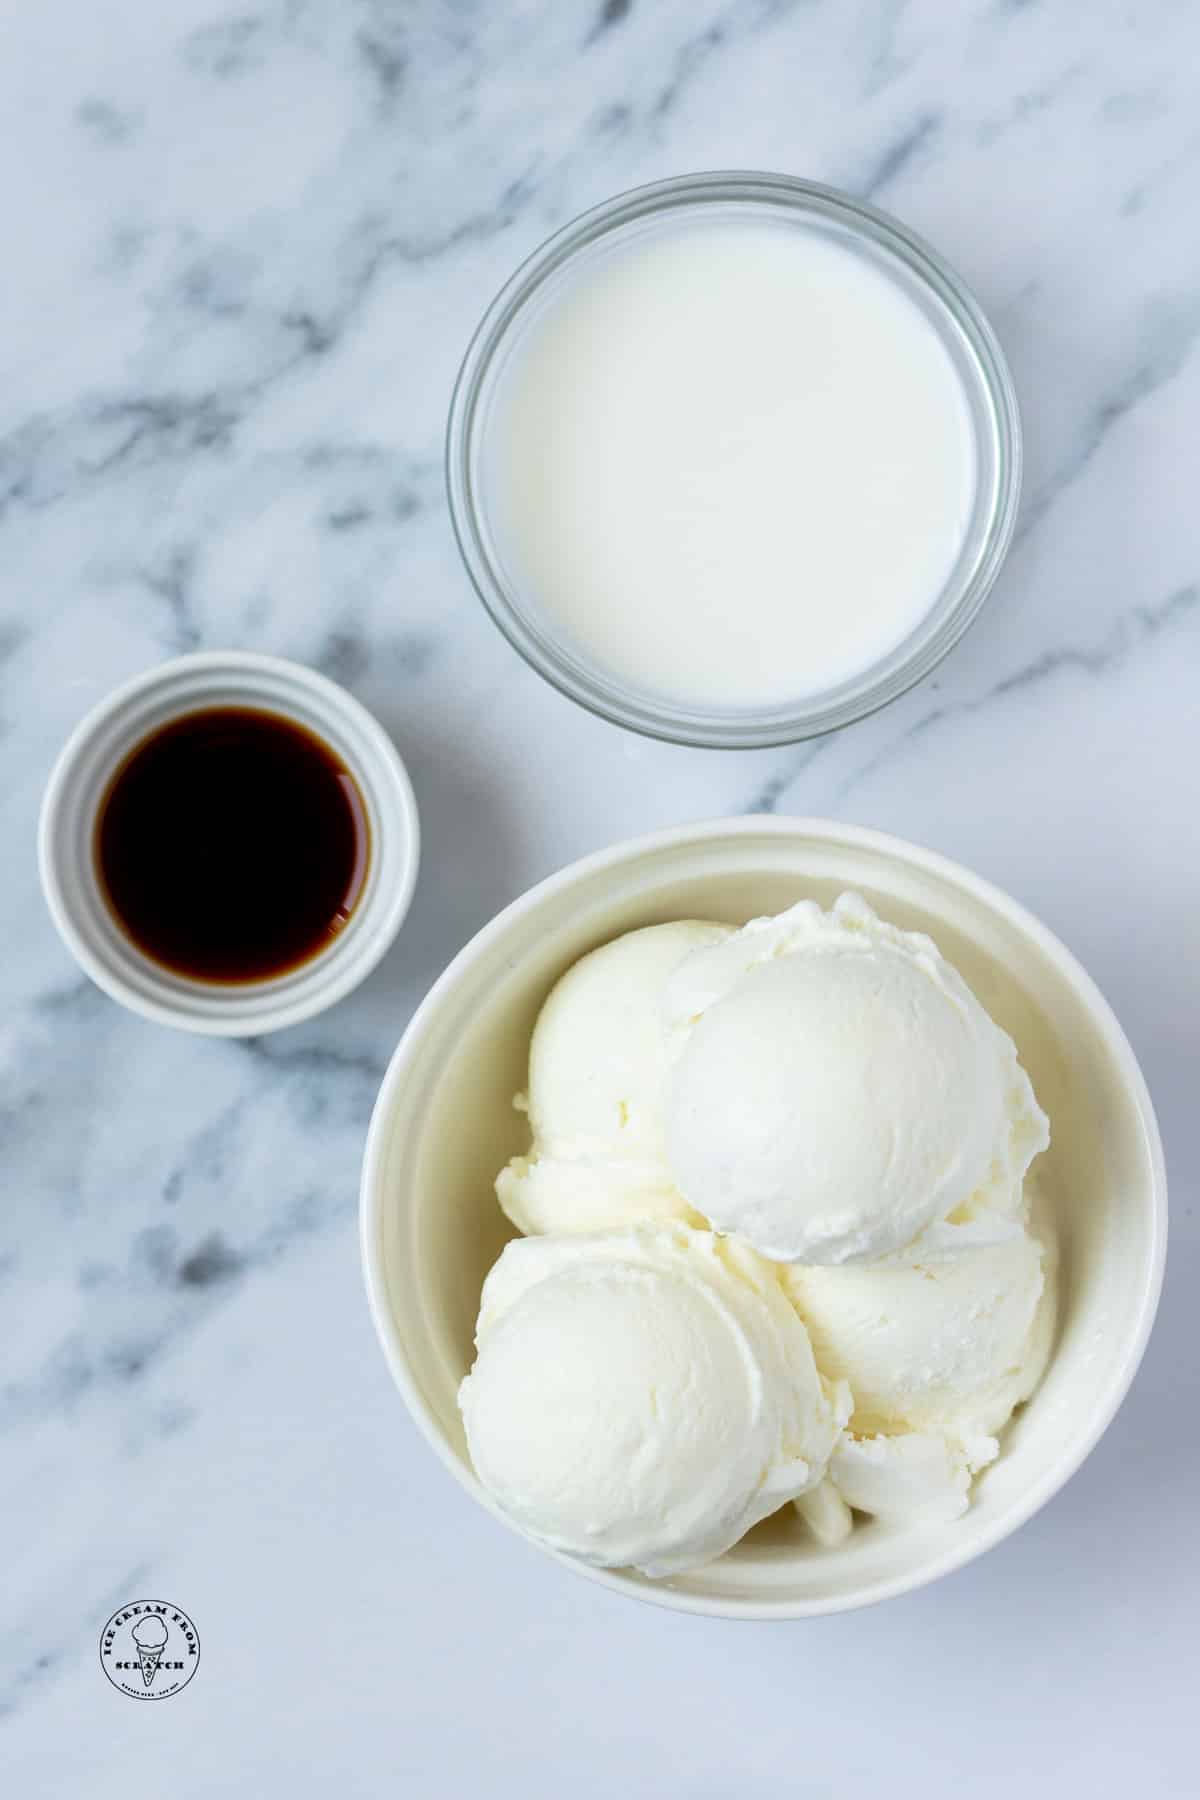 Vegan ice cream, a bowl of vanilla extract, and a bowl of non-dairy milk on a marble counter, viewed from above.